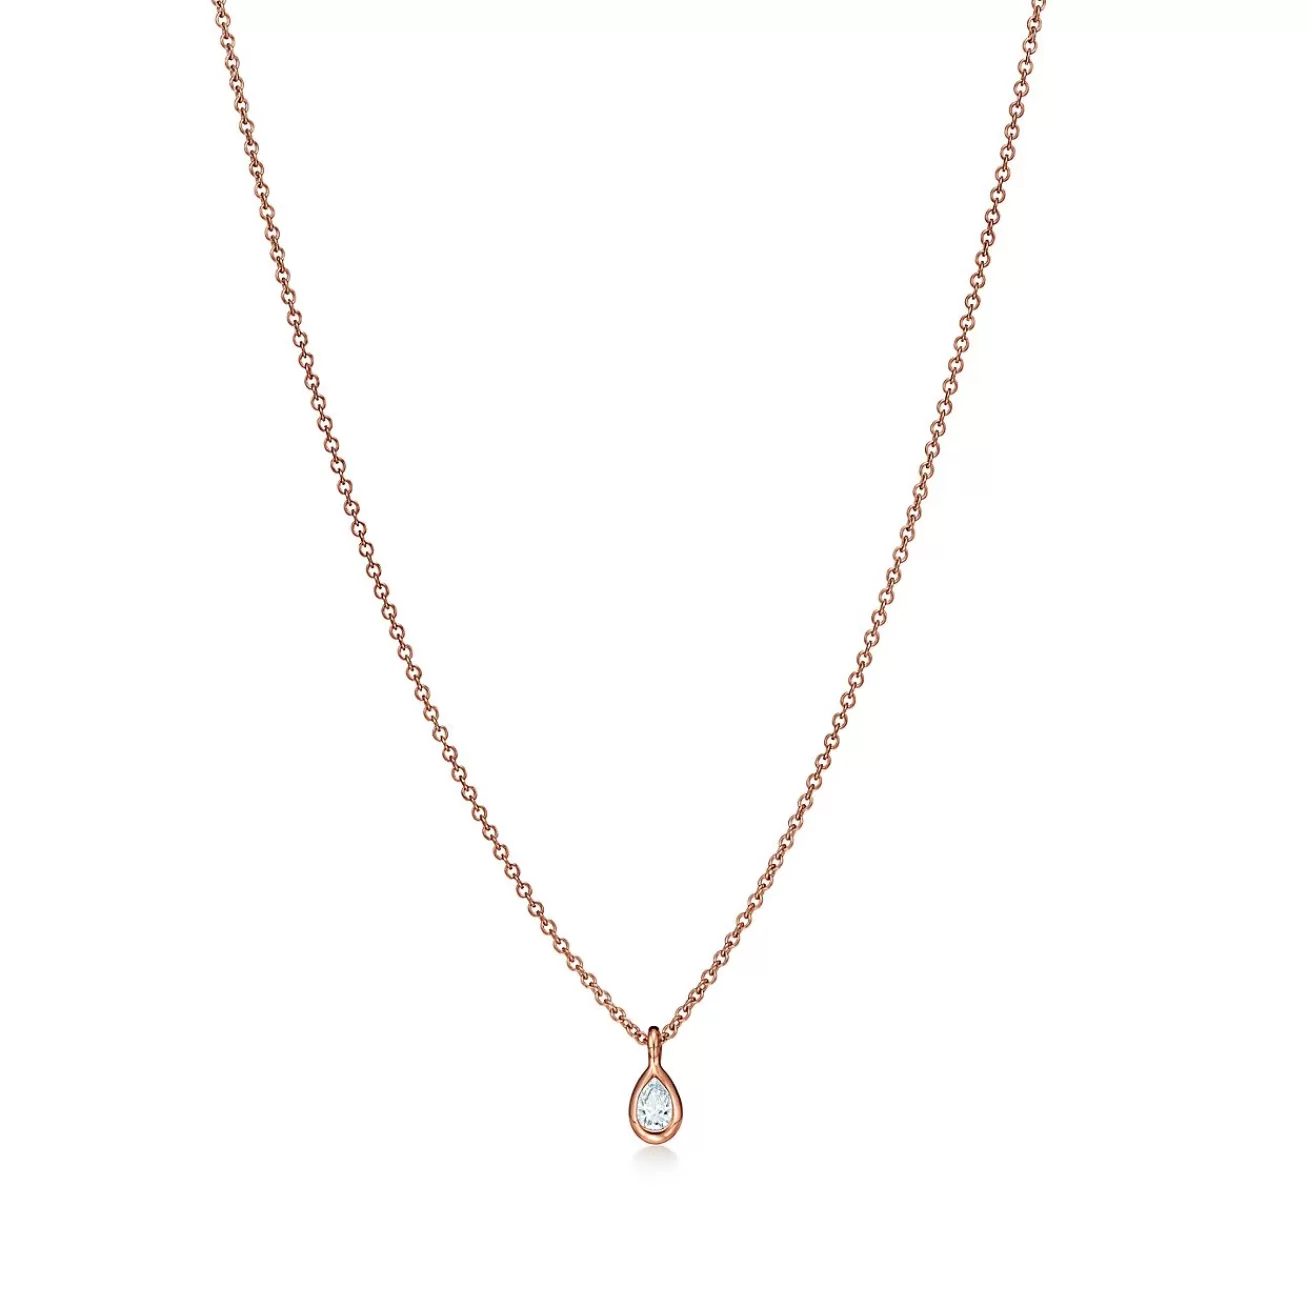 Tiffany & Co. Elsa Peretti® Diamonds by the Yard® pendant in 18k rose gold. | ^ Necklaces & Pendants | Rose Gold Jewelry